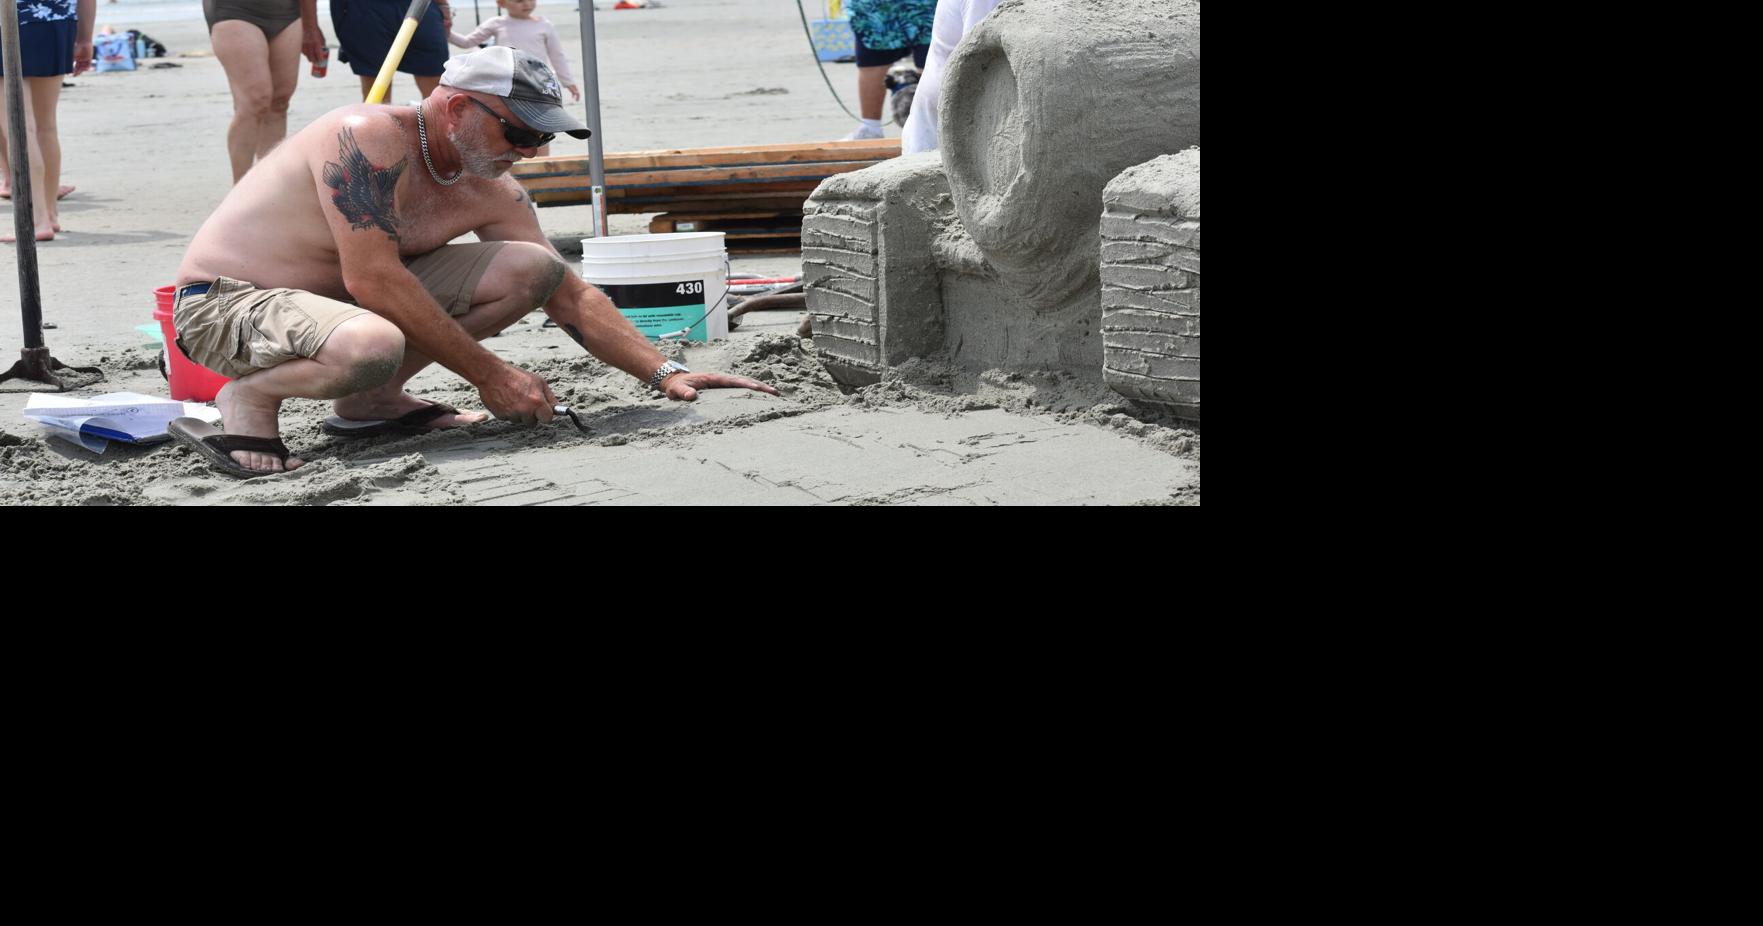 Innovation on display at annual IOP Sand Sculpting contest, News